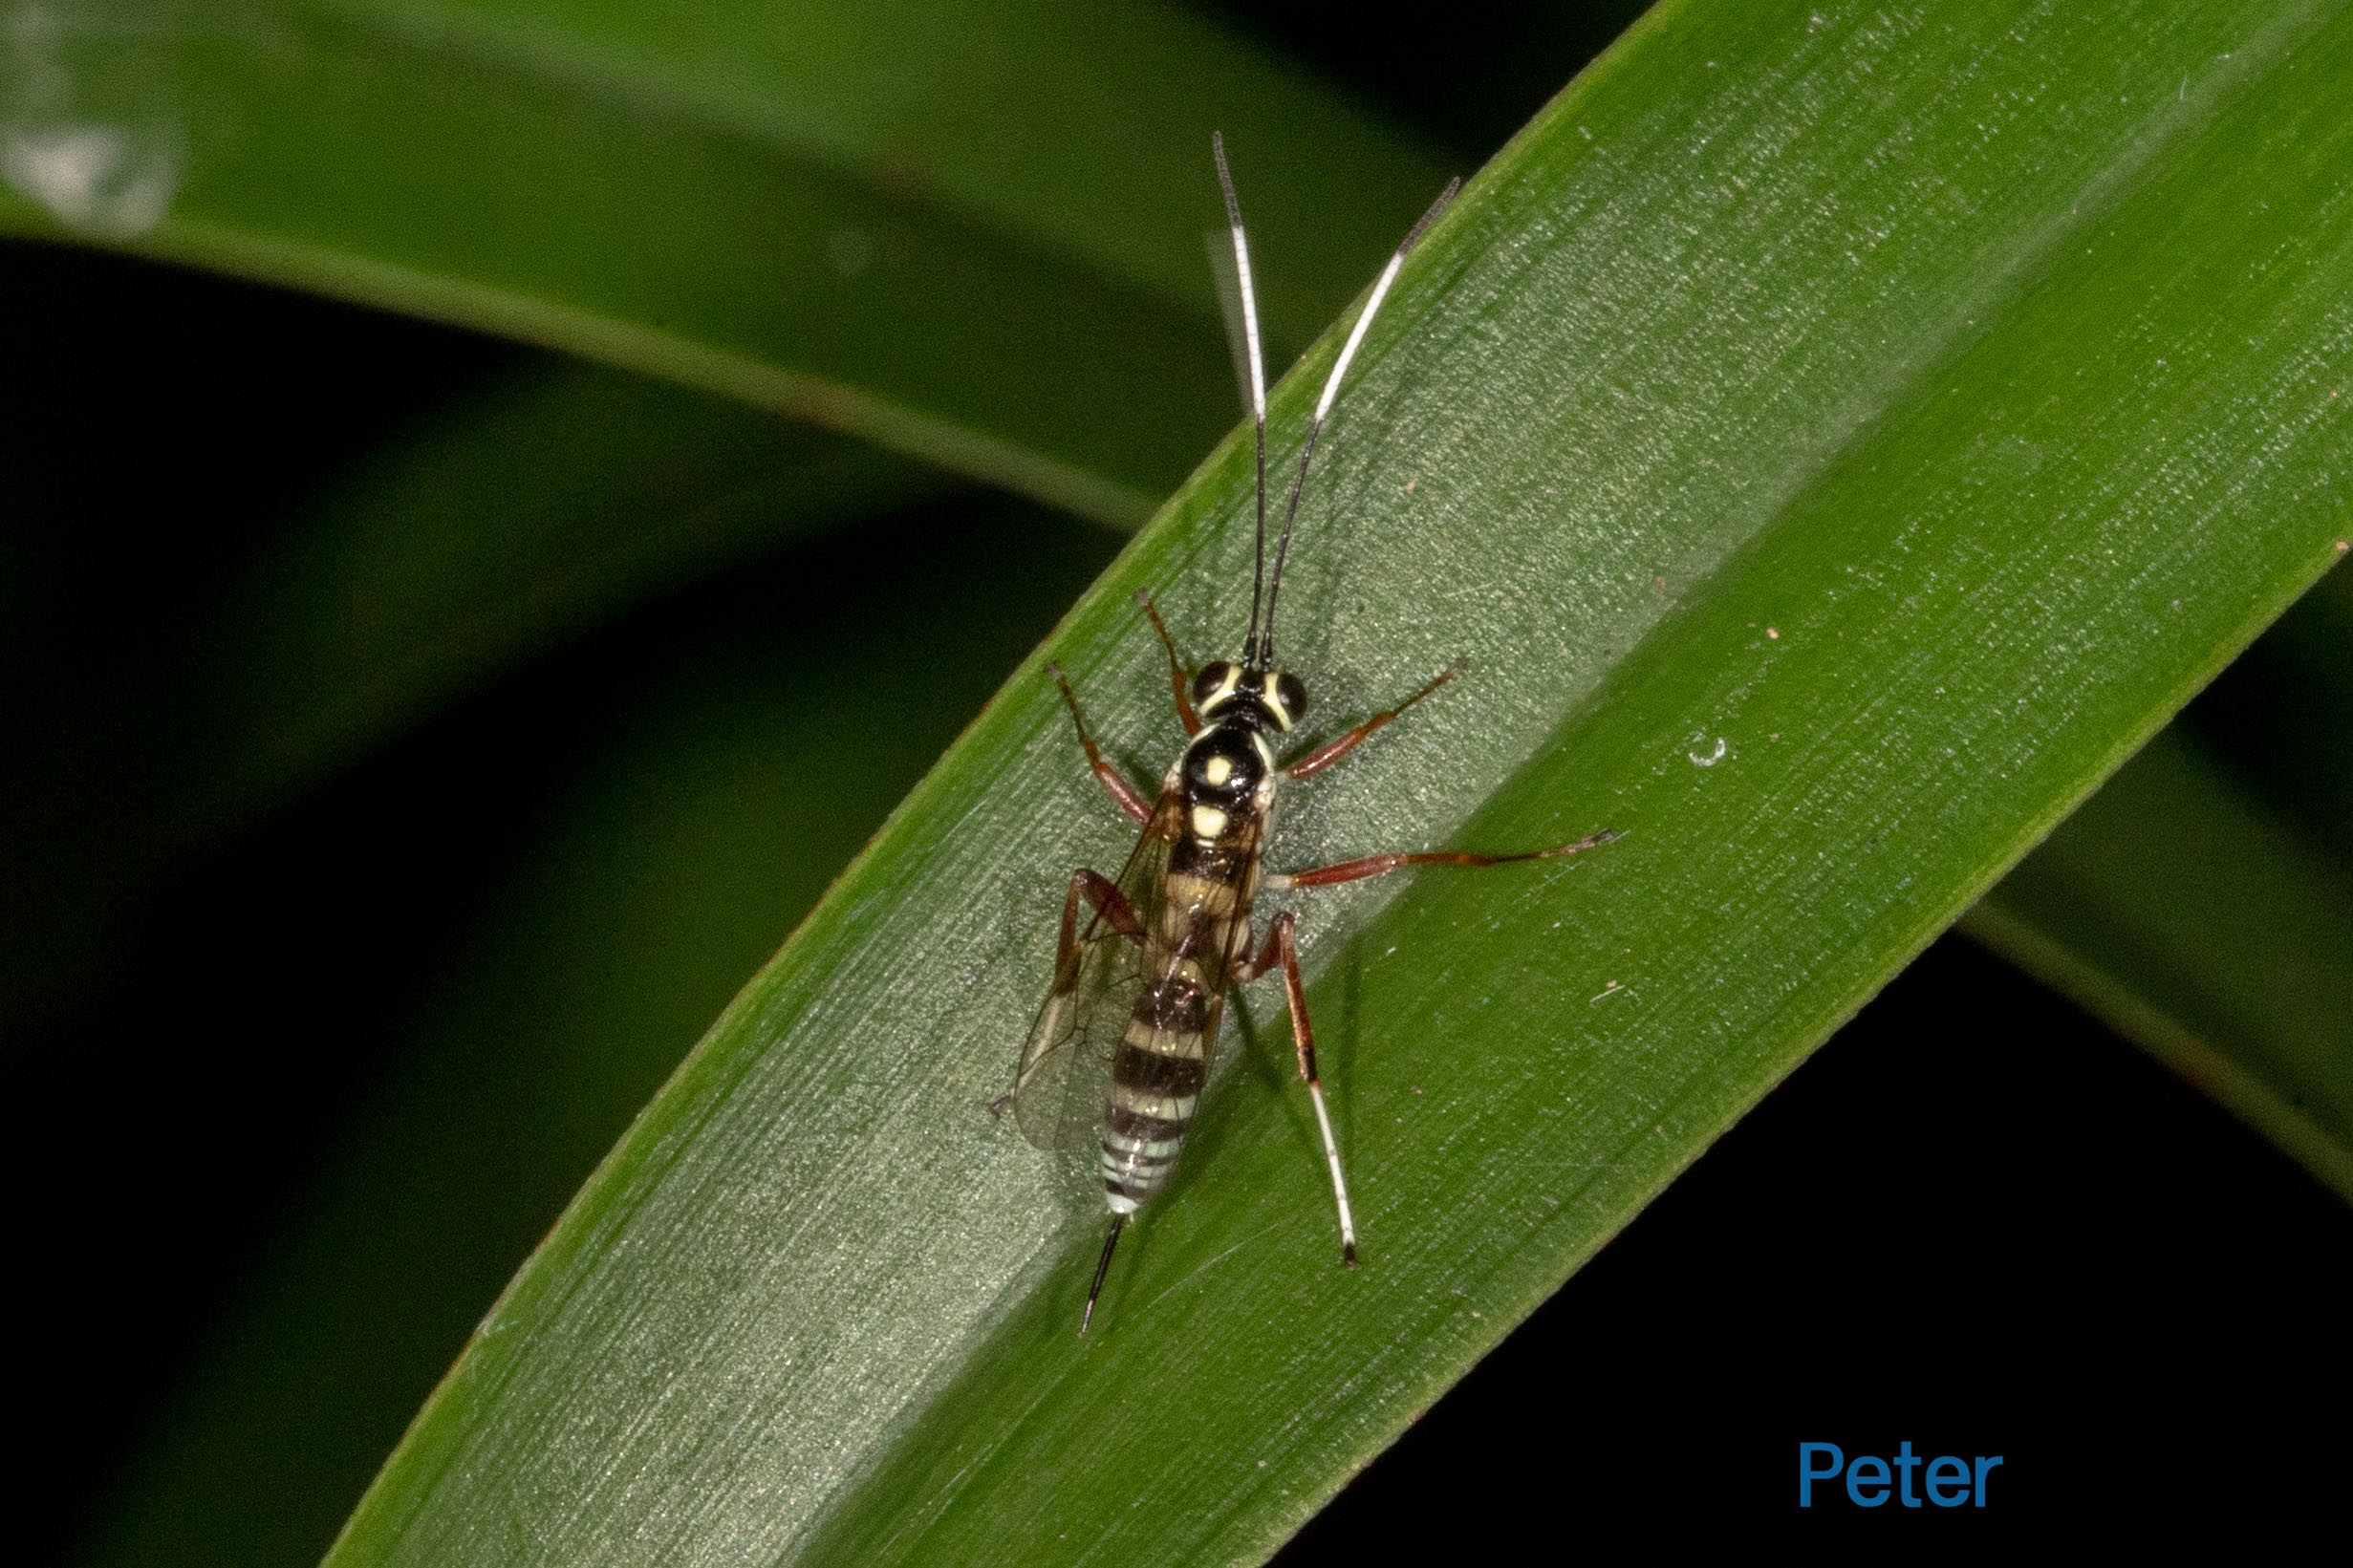 The Banded Pupa Parasite Wasp (Gotra sp.) is one of the Striped Ichneumon Wasps